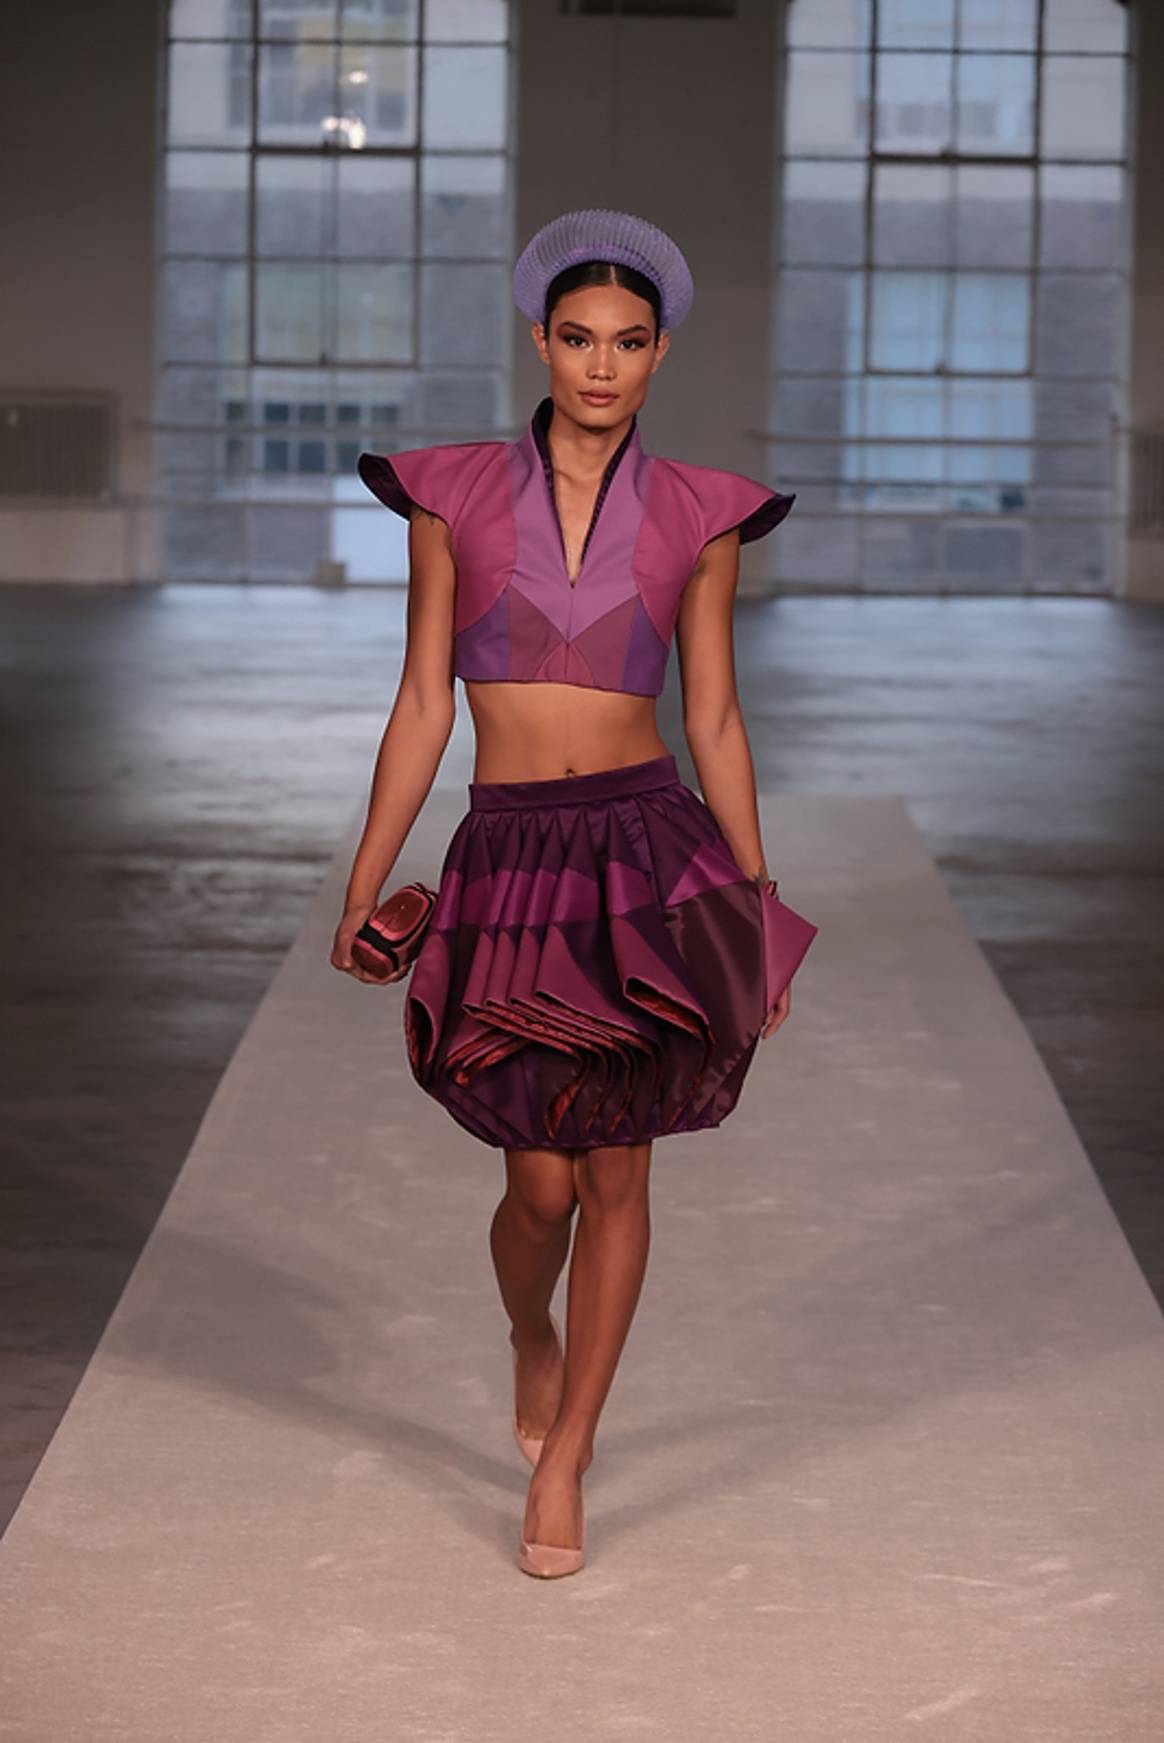 A look by Advanced Fashion Design at FIDM student Esther Gaor. Image courtesy of the Fashion Institute of Design and Merchandising.